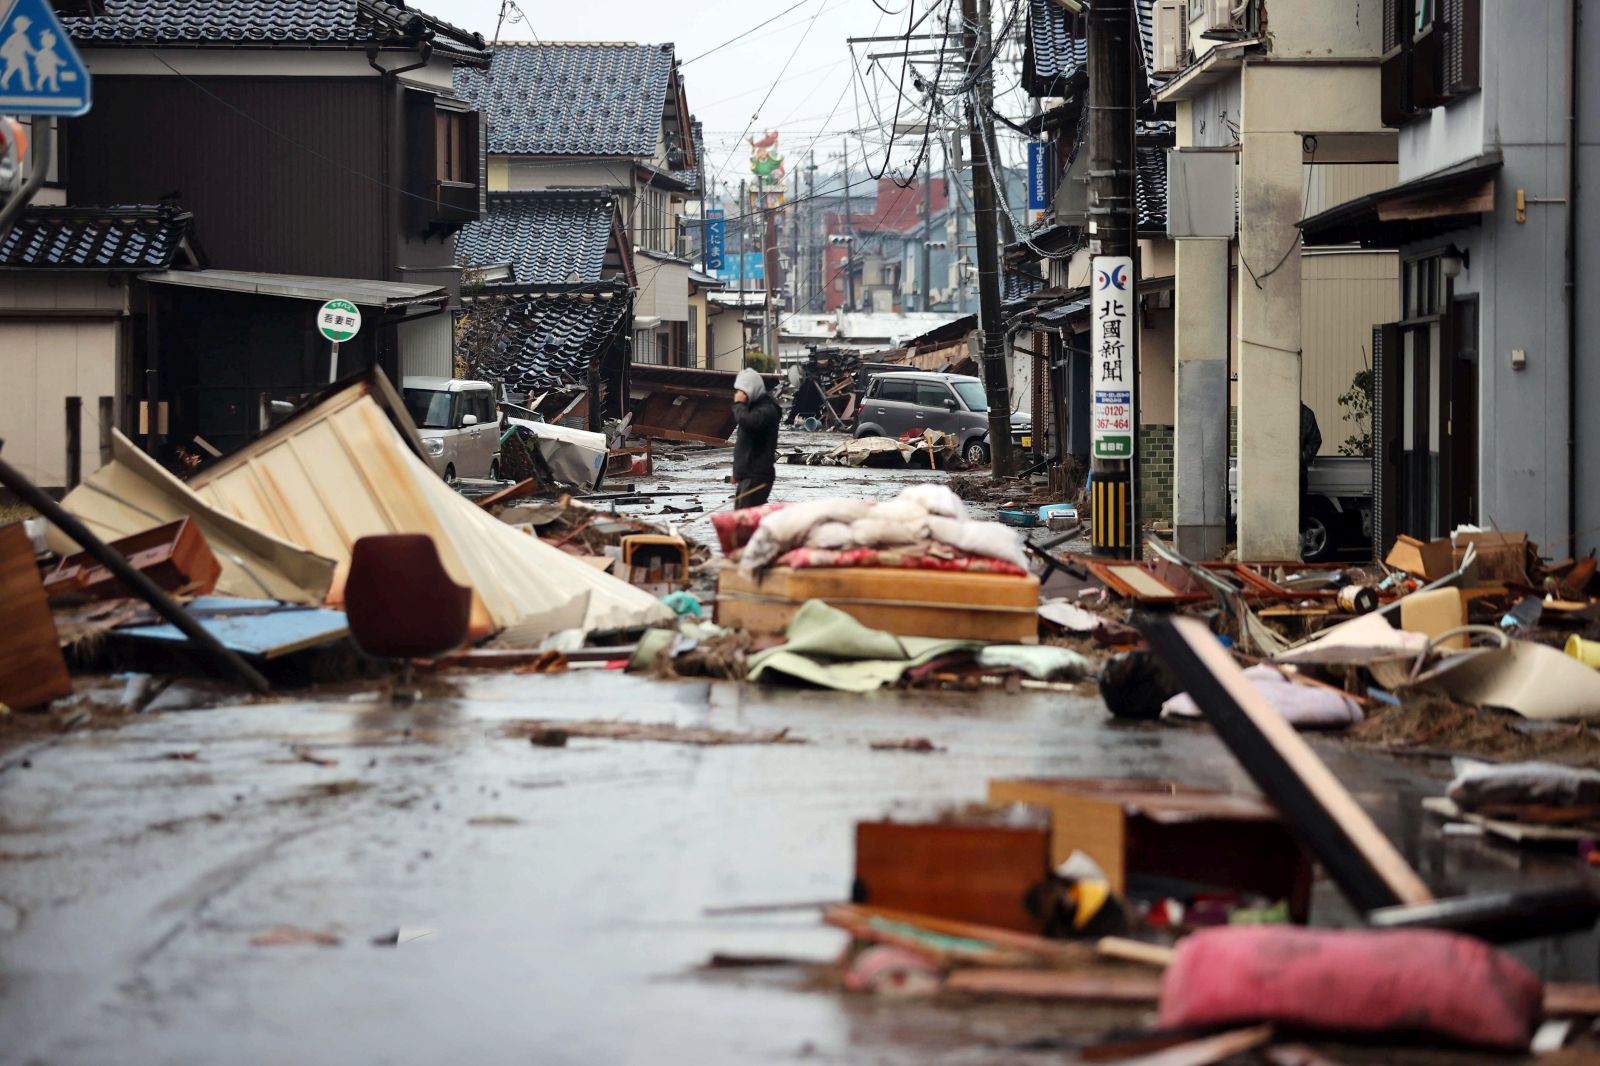 epa11060190 A man stands in a street covered with debris from collapsed houses following an earthquake in Suzu, Ishikawa Prefecture, Japan, 06 January 2024. At least 100 people were killed following a magnitude 7 earthquake (the USGS listed the earthquake as 7.5 magnitude), which occurred on 01 January, according to the Ishikawa Prefecture Government. About 33,000 residents in Ishikawa Prefecture have evacuated to 355 makeshift evacuation centers.  EPA/JIJI PRESS JAPAN OUT EDITORIAL USE ONLY/